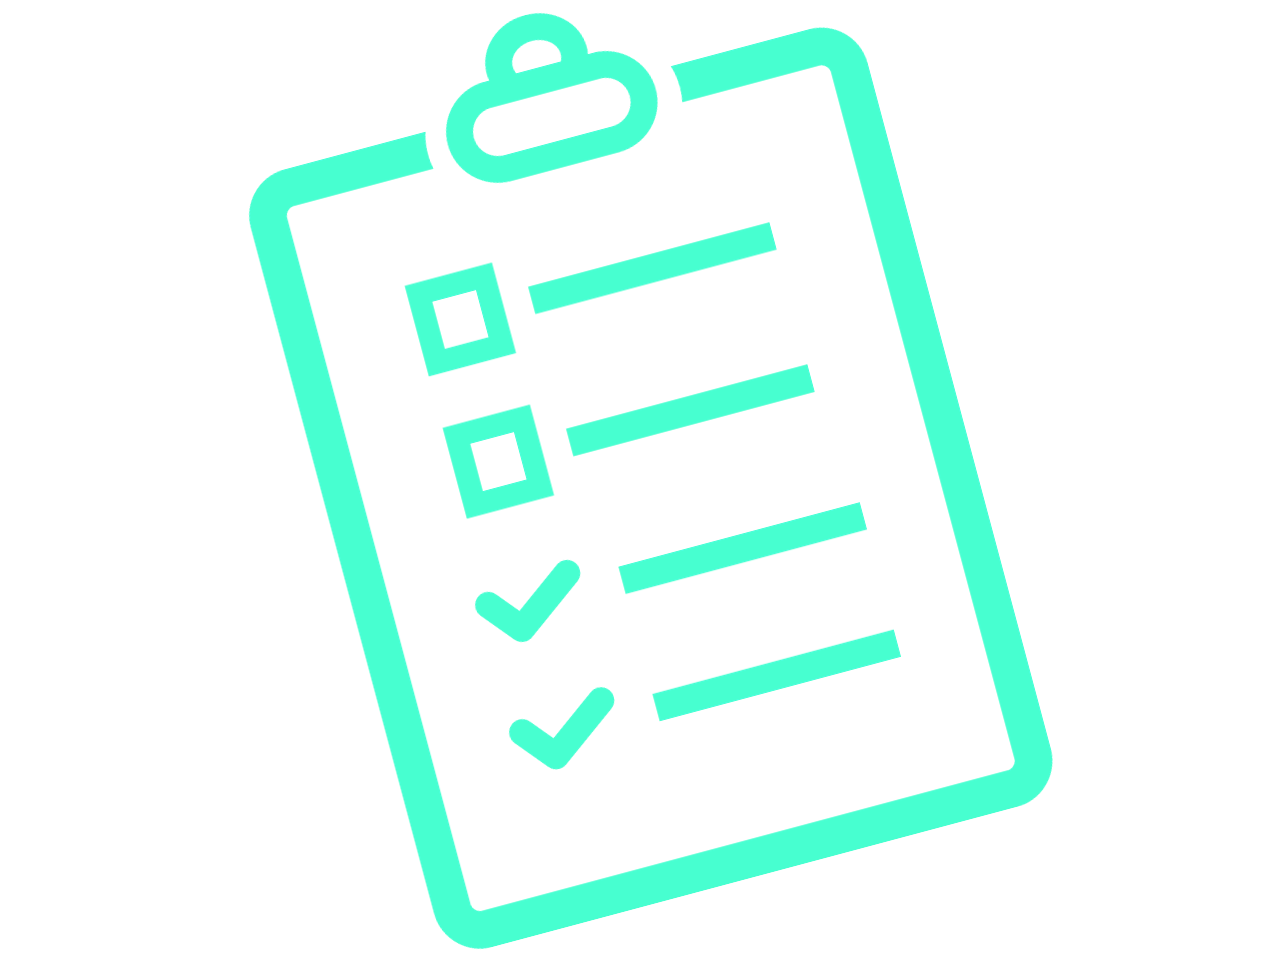 An icon of a clipboard with a checklist on it. Two of the checklist items are marked as complete.